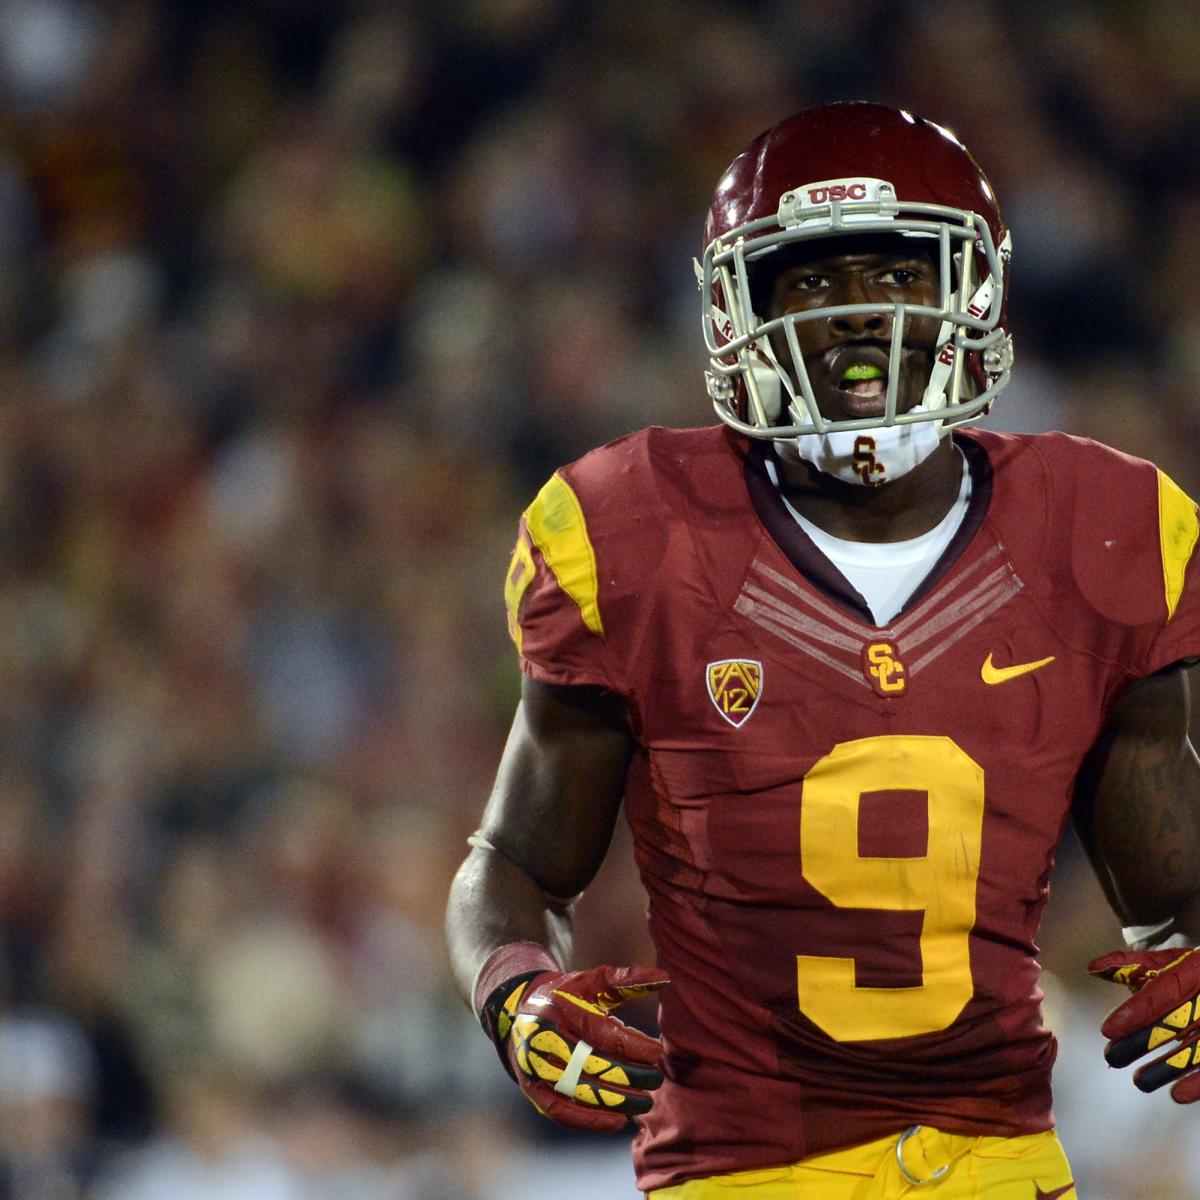 USC Football: Key Offensive Players for the Trojans in 2013 | News ...